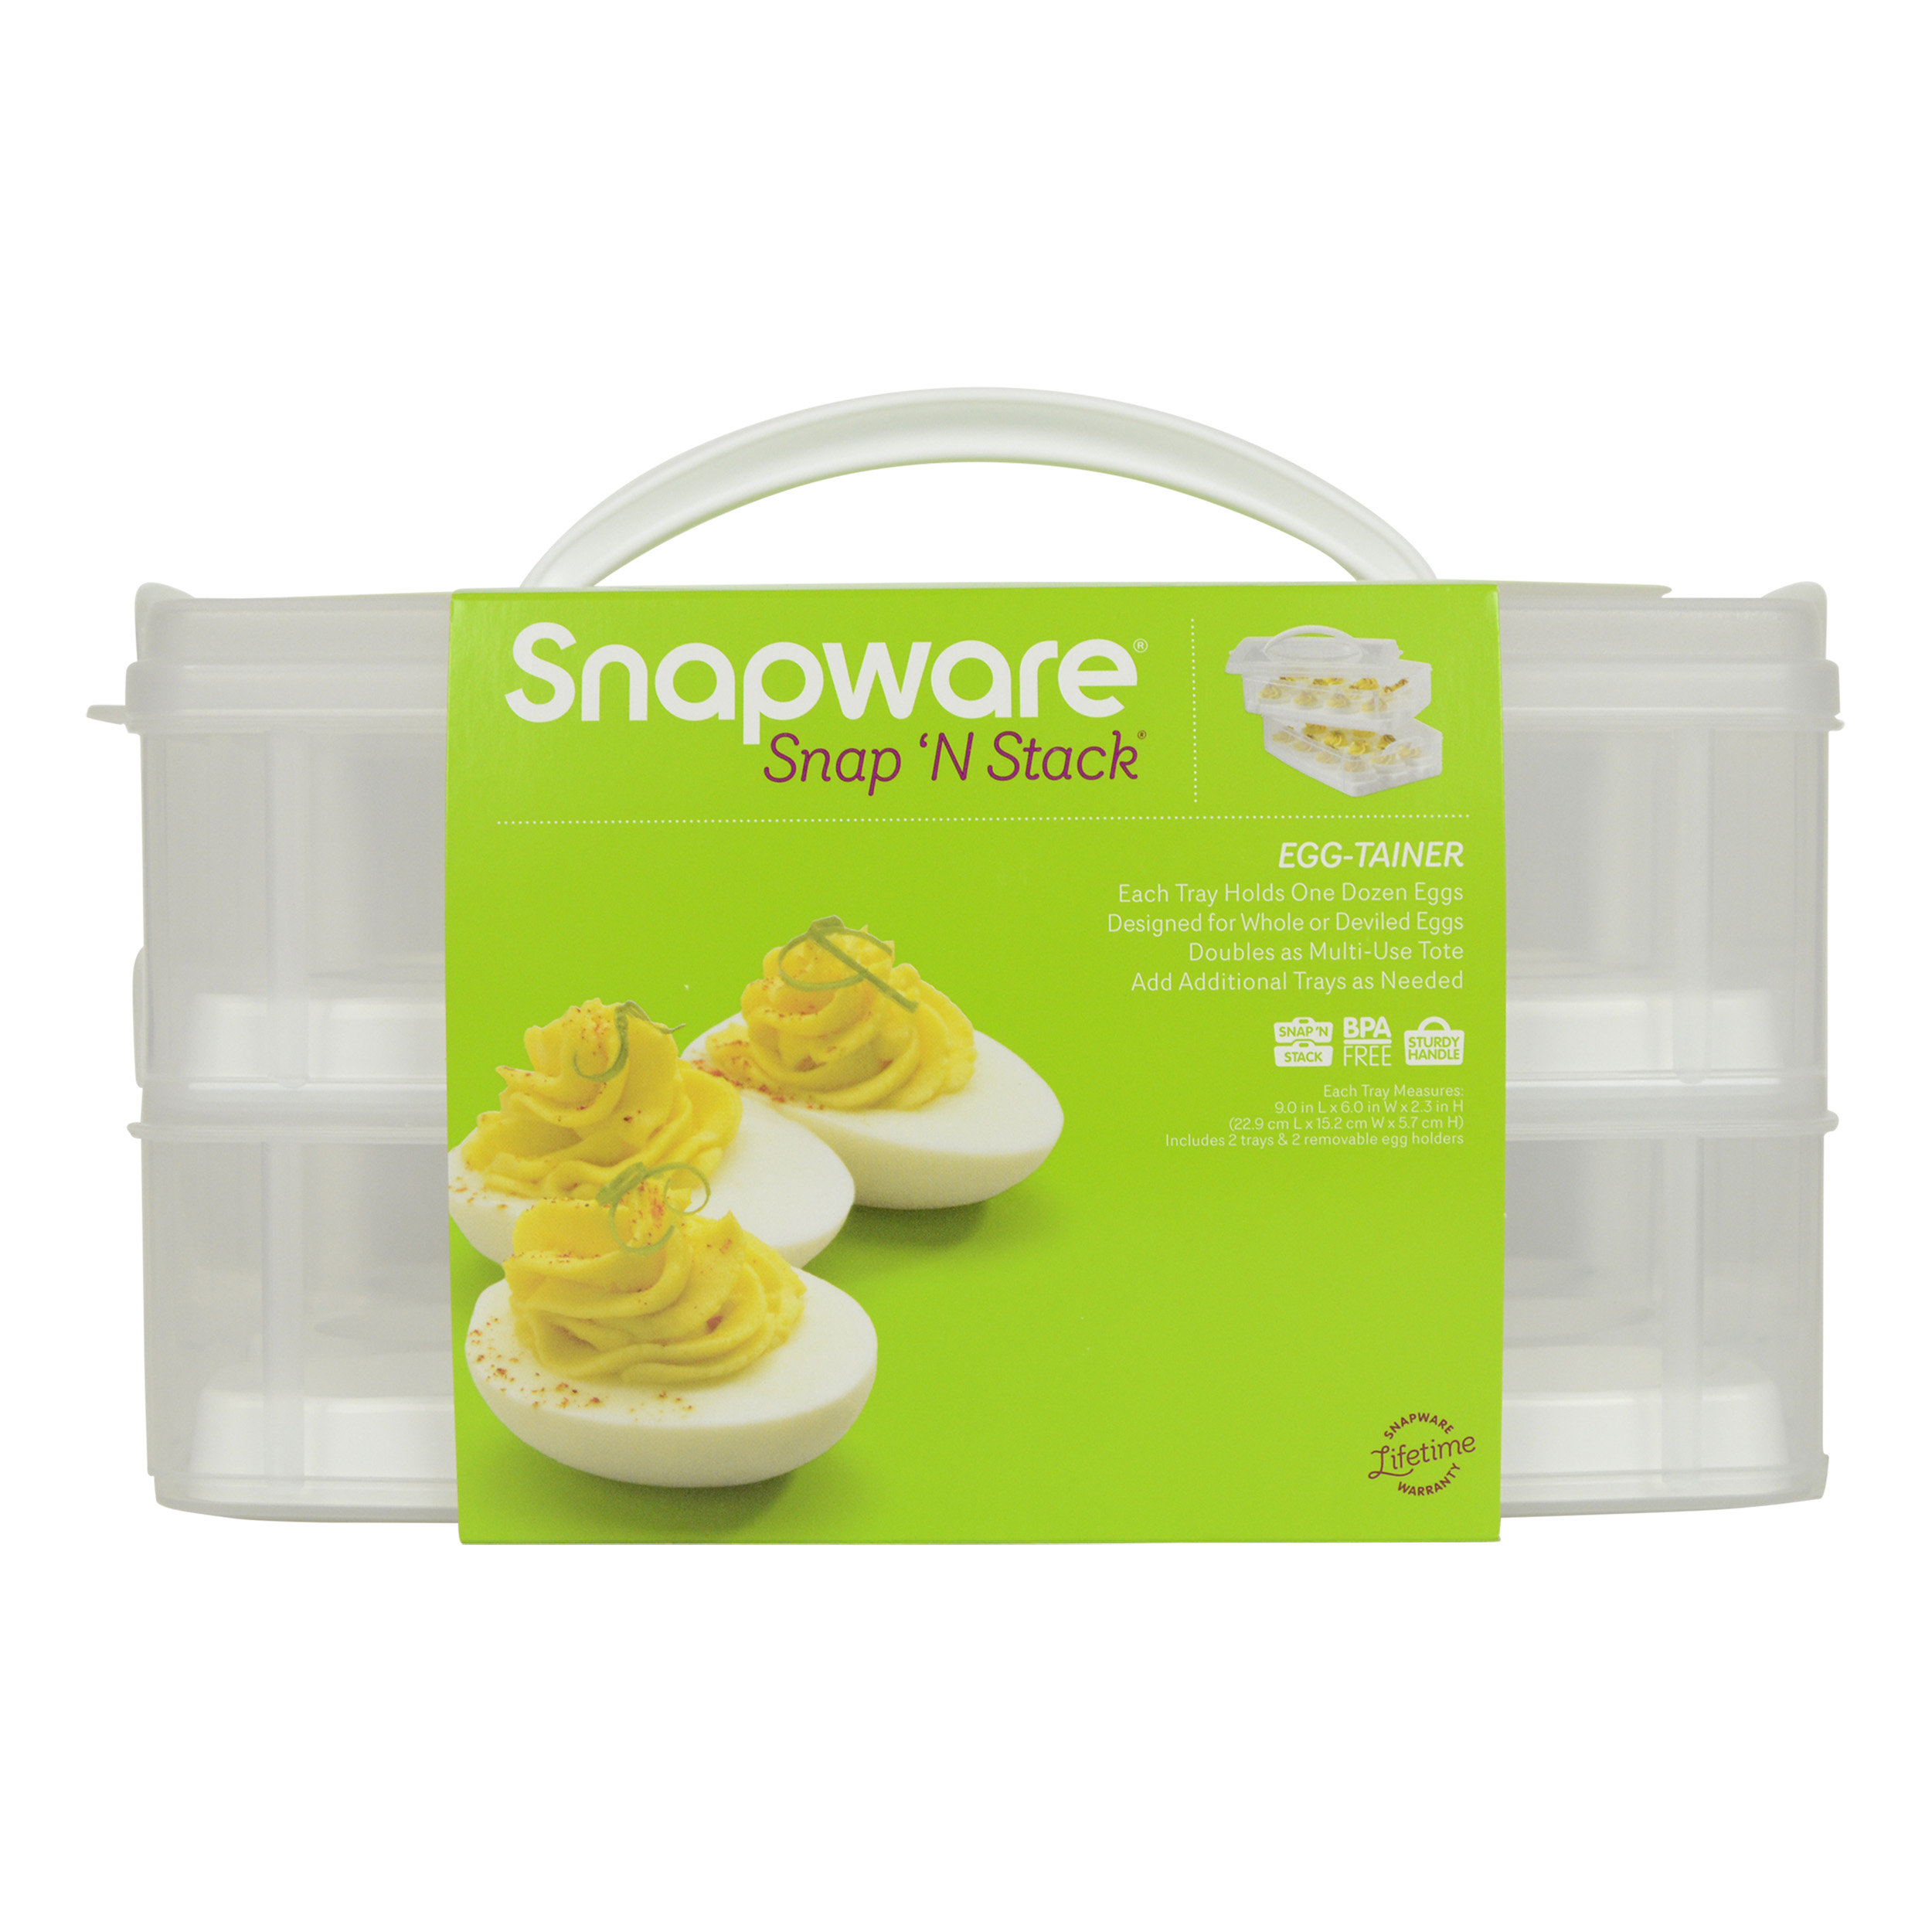 Snapware 2-Layer Snap N Stack Food Storage With Egg Holder Tray